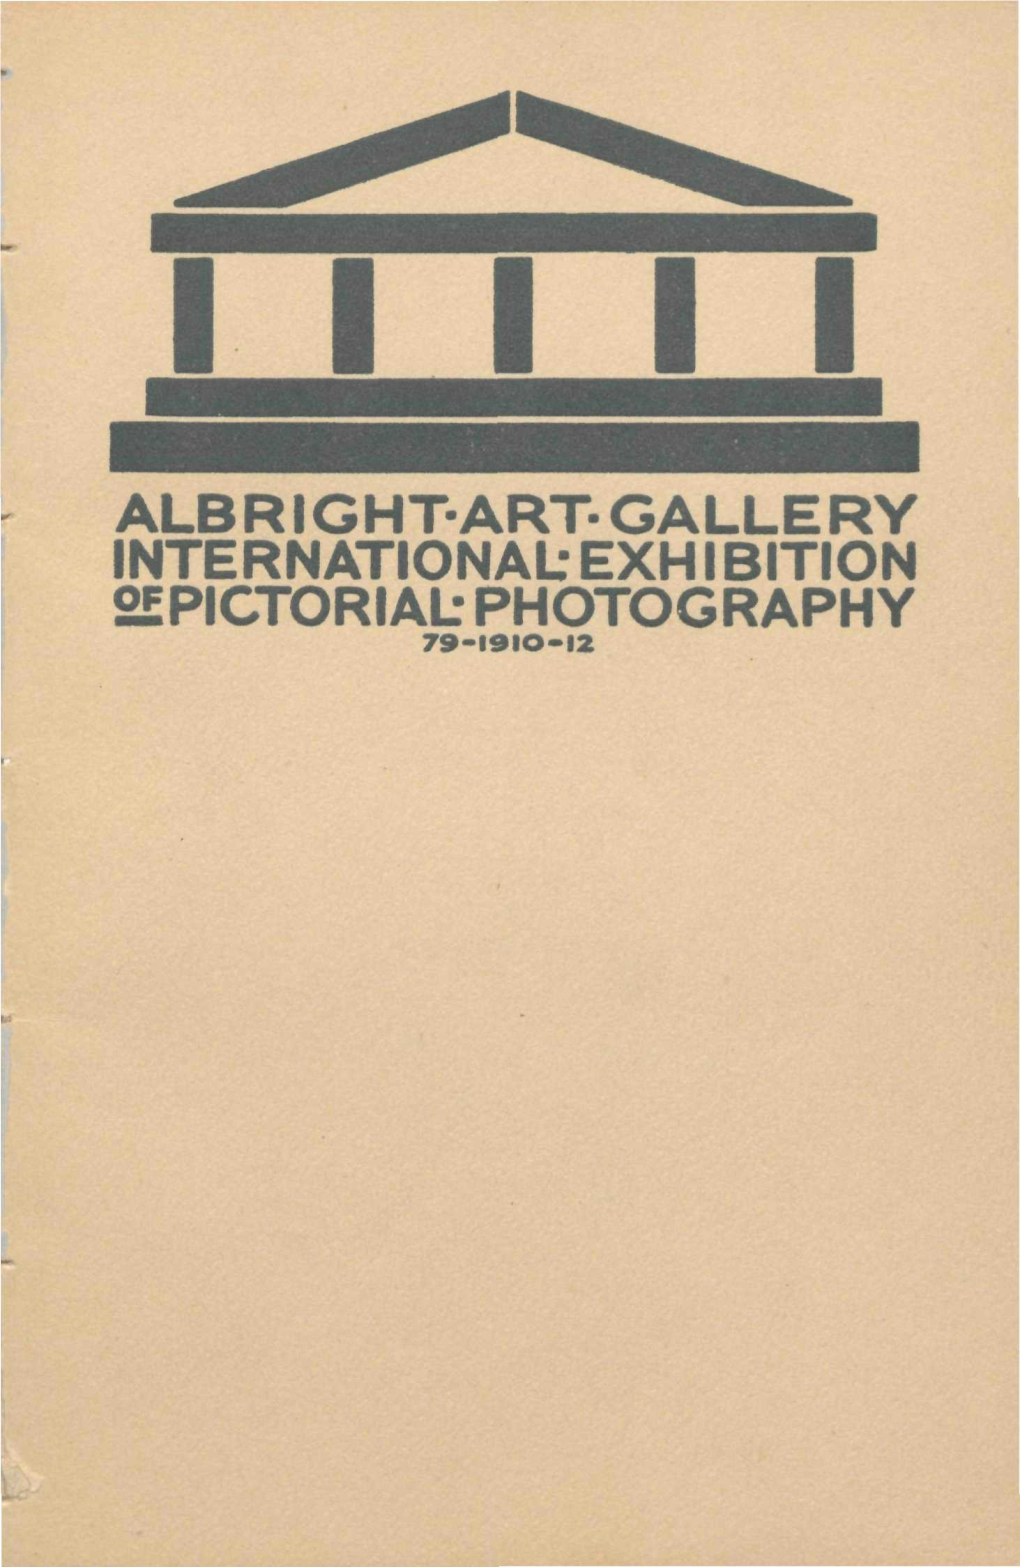 Exhi Bit!On 2Epictorial Photography 79-I9io-I2 Plan of the Albright Art Gallery the Buffalo Fine Arts Academy Albright Art Gallery